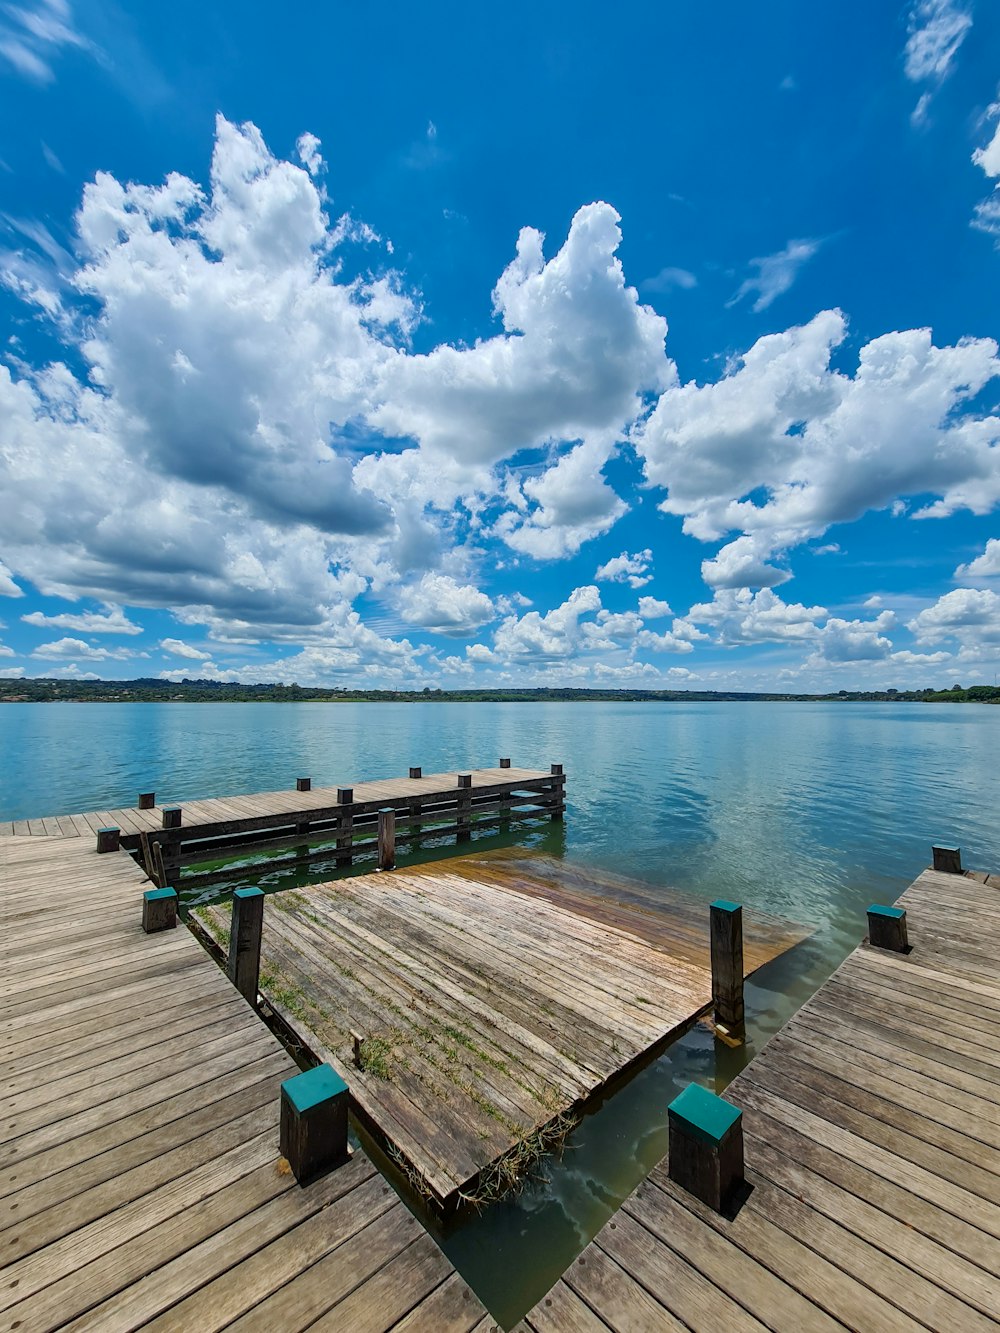 brown wooden dock on sea under blue and white cloudy sky during daytime